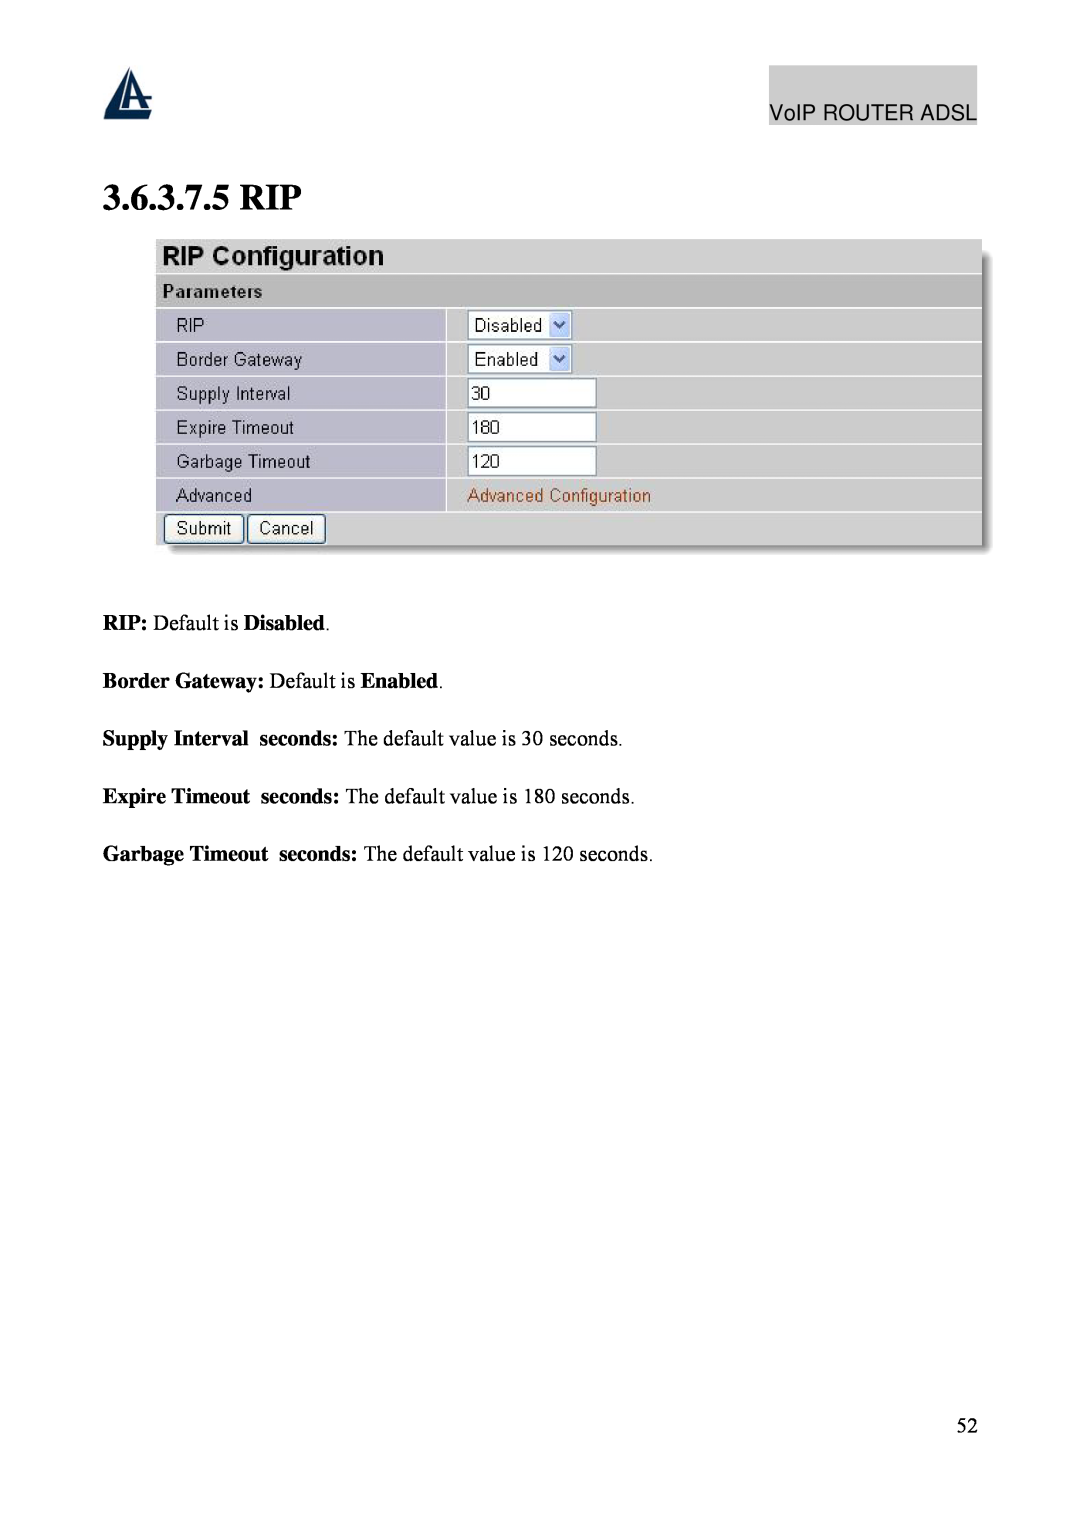 Atlantis Land A02-RAV211 manual 3.6.3.7.5 RIP, RIP Default is Disabled Border Gateway Default is Enabled, VoIP ROUTER ADSL 